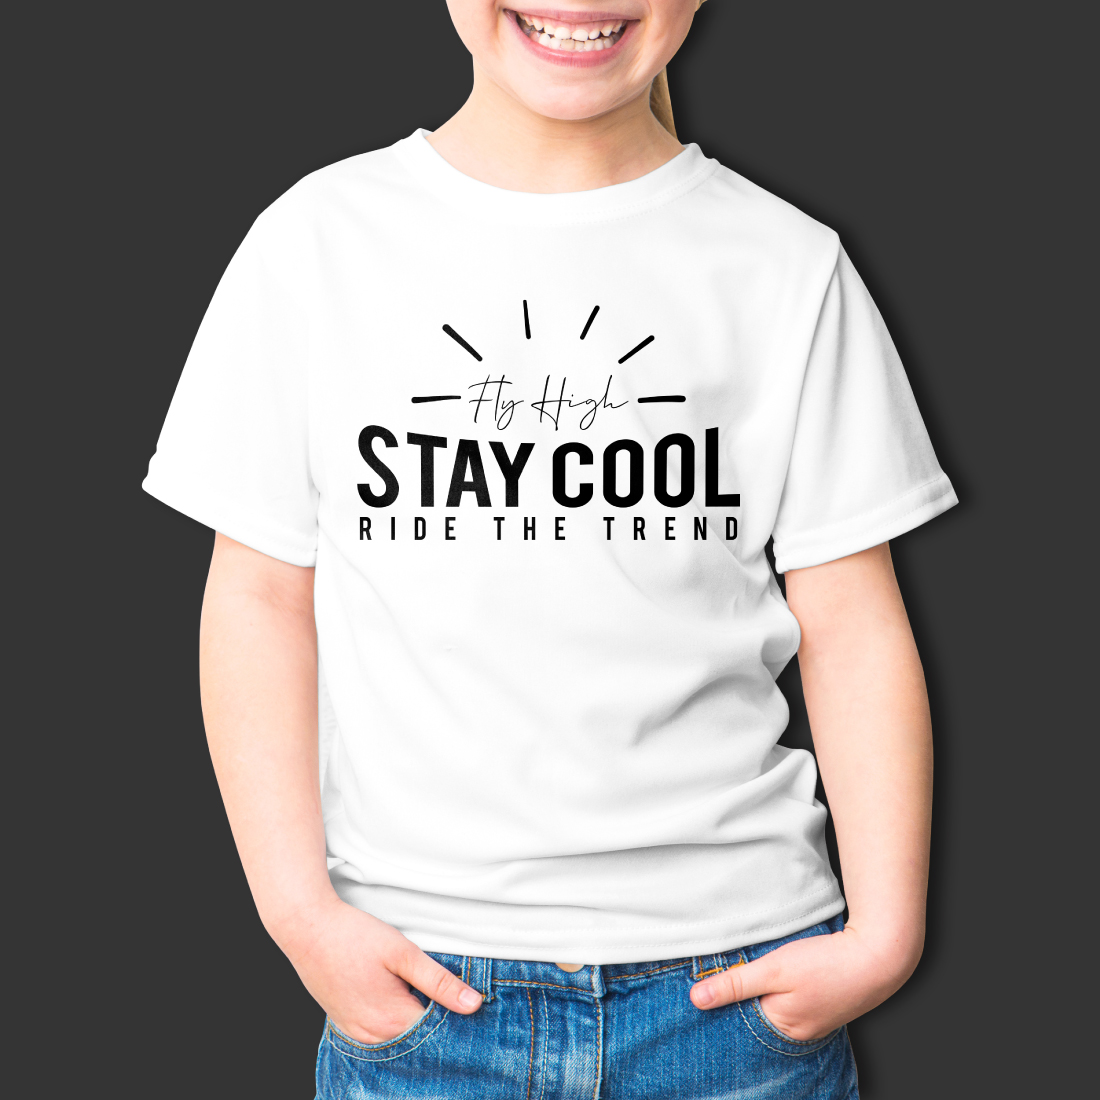 fly high stay cool ride the trend tshirt design cover image.